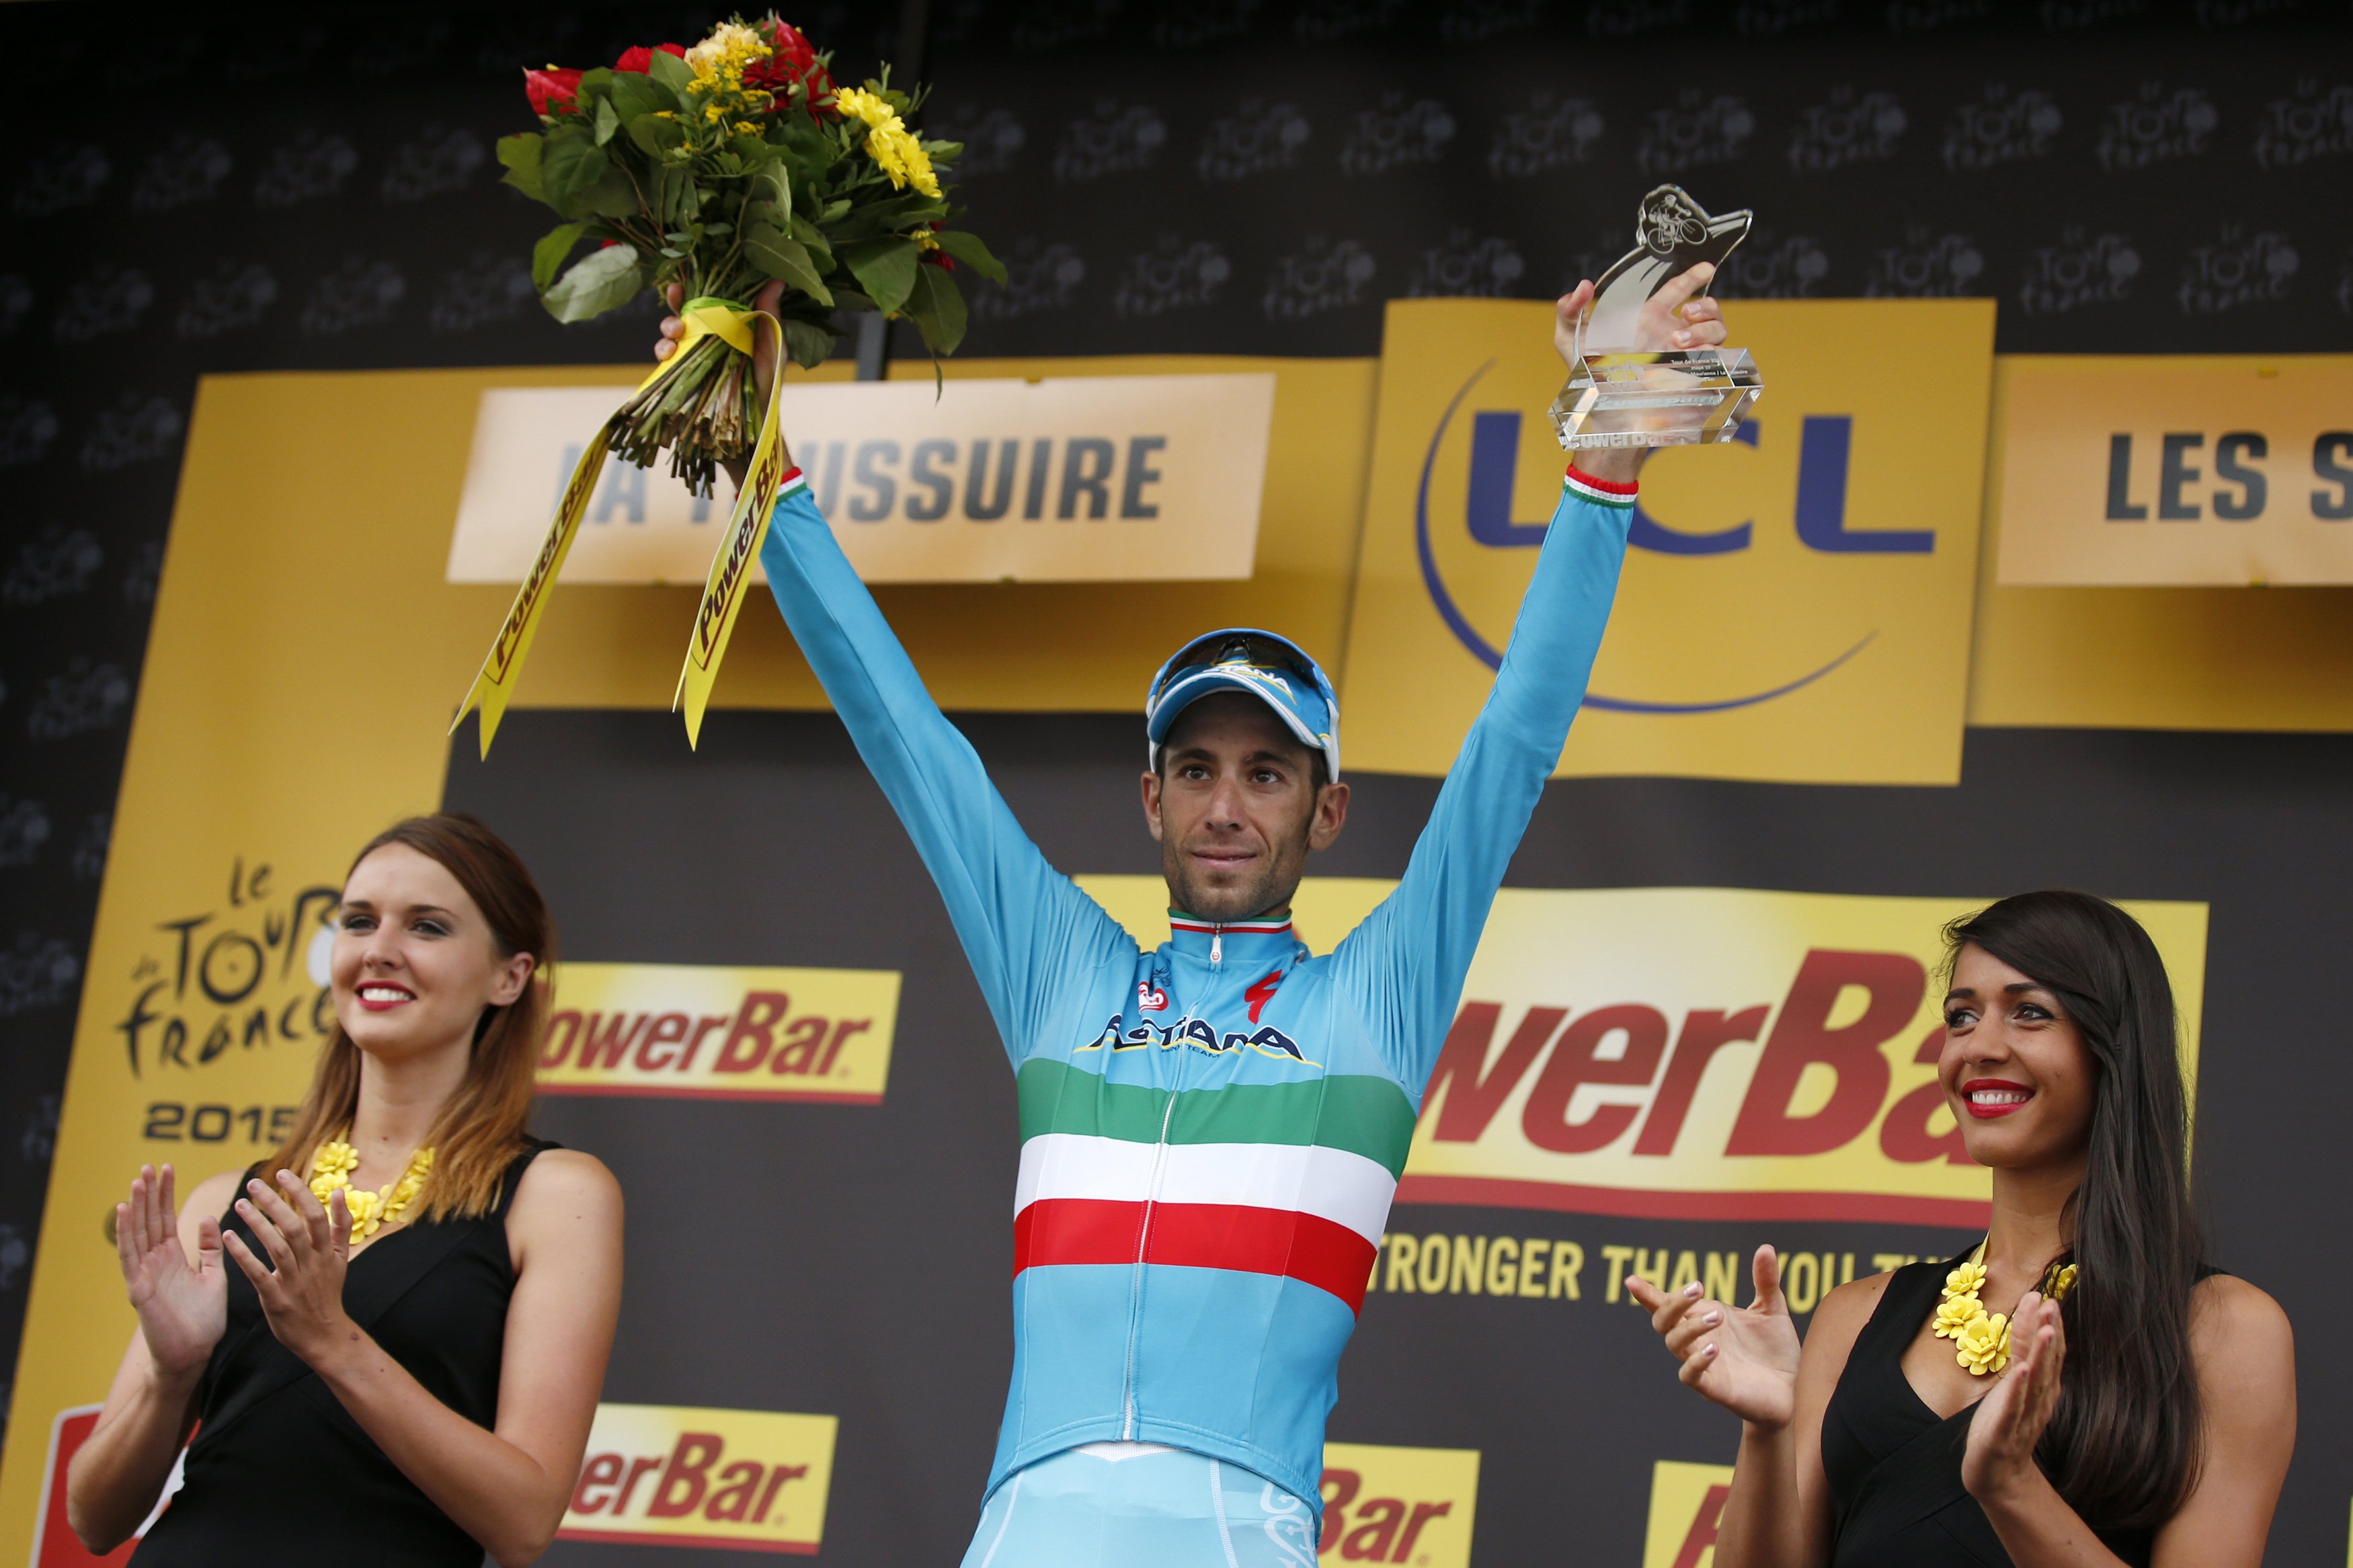 Astana rider Vincenzo Nibali of Italy celebrates after winning the 19th stage of the Tour de France. Photo: Reuters